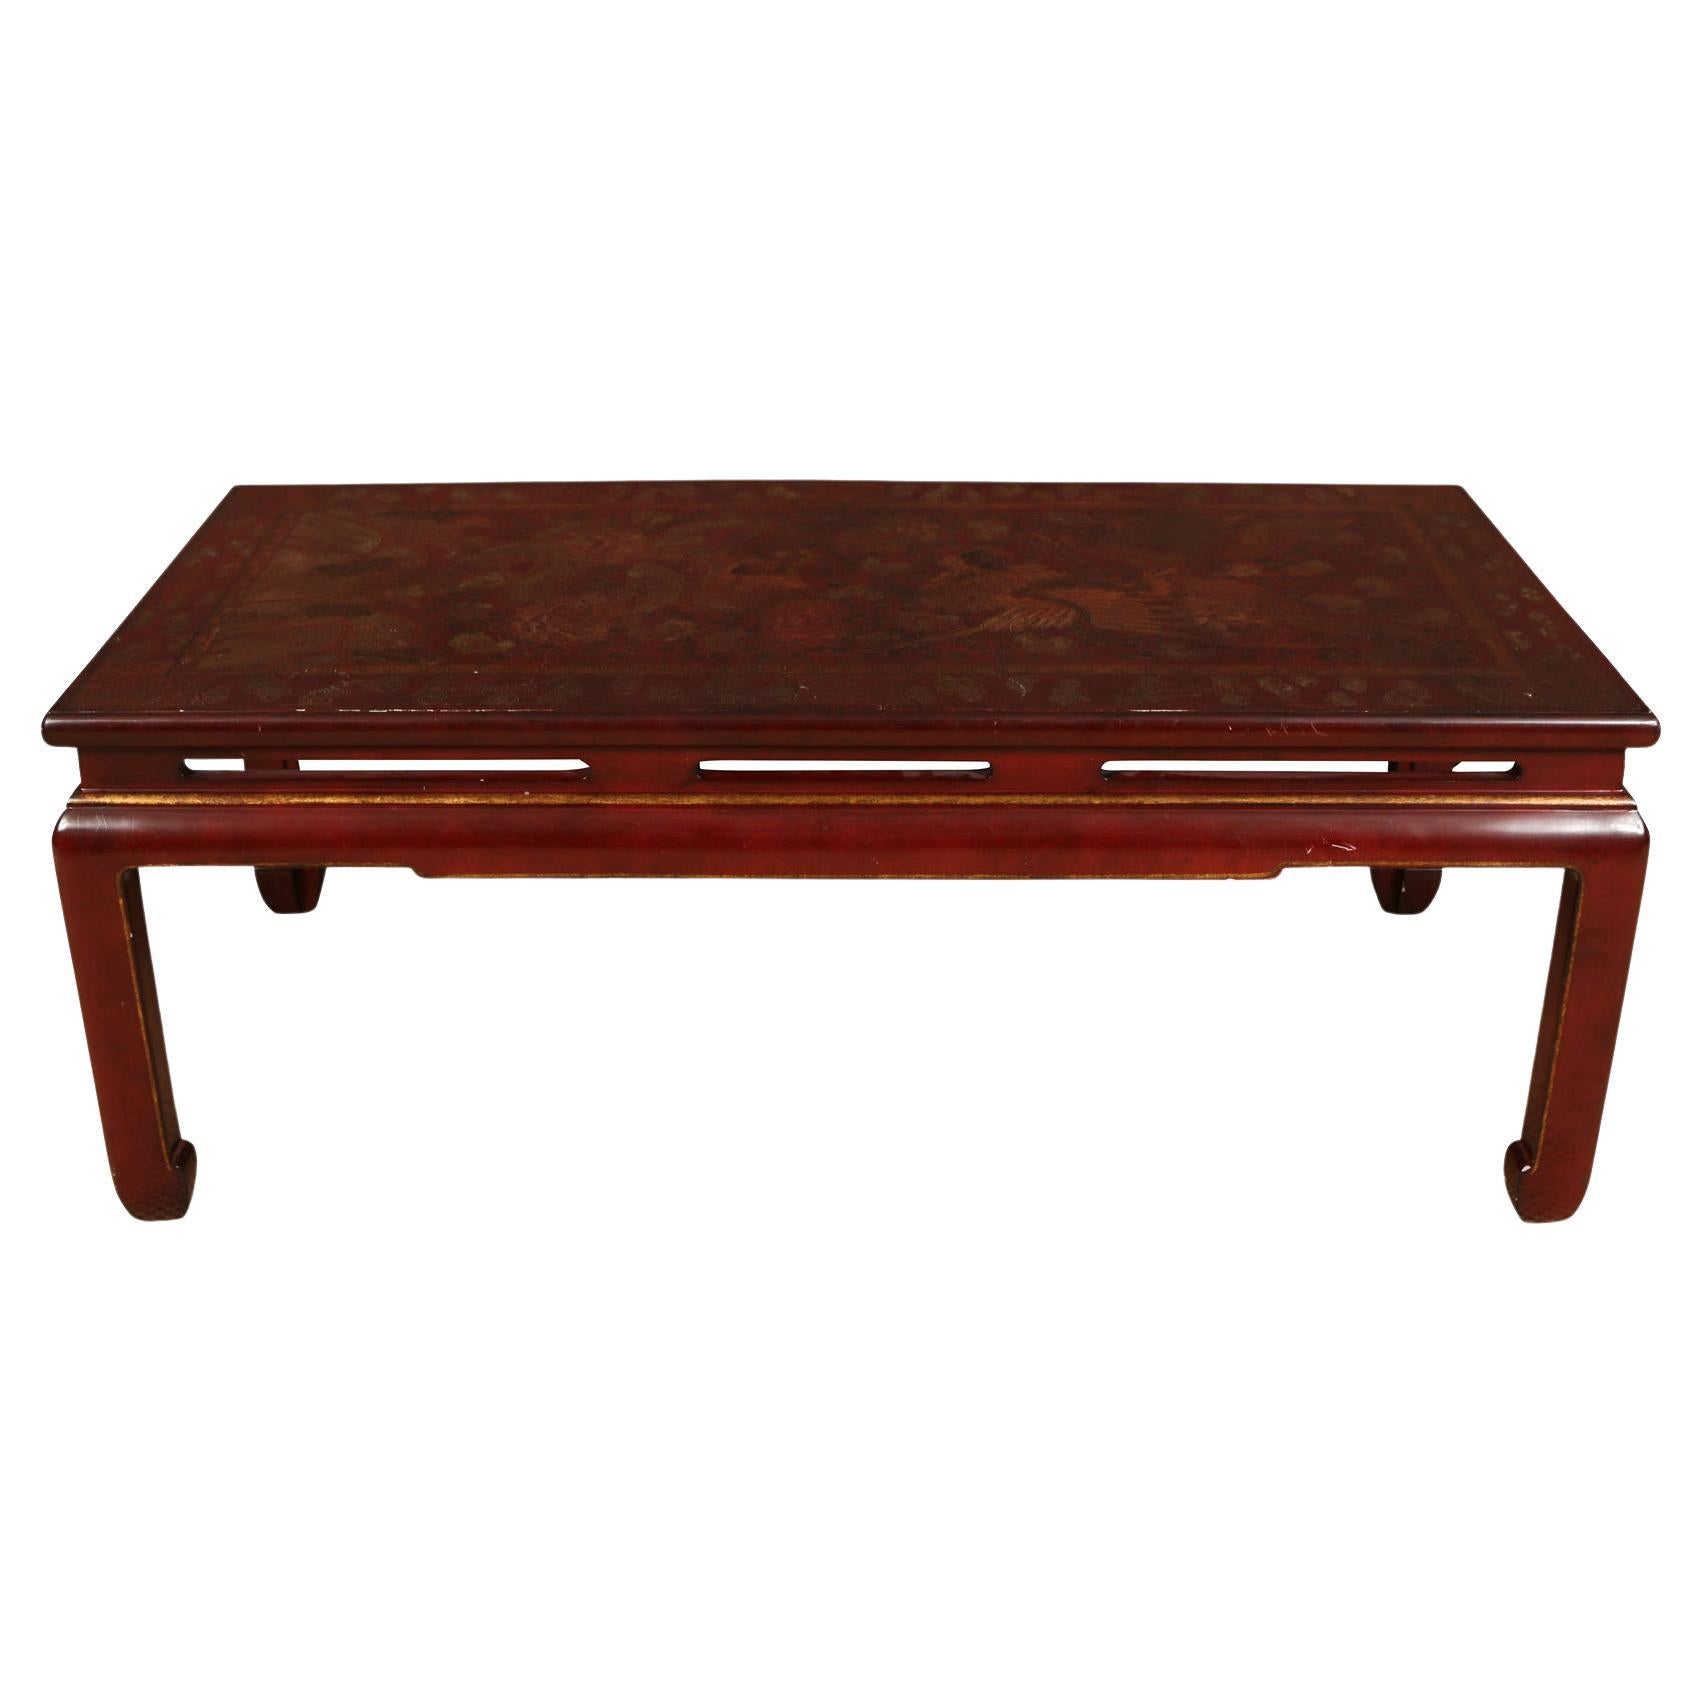 Red Asian Lacquer Coffee Table with Chinoiserie Detail